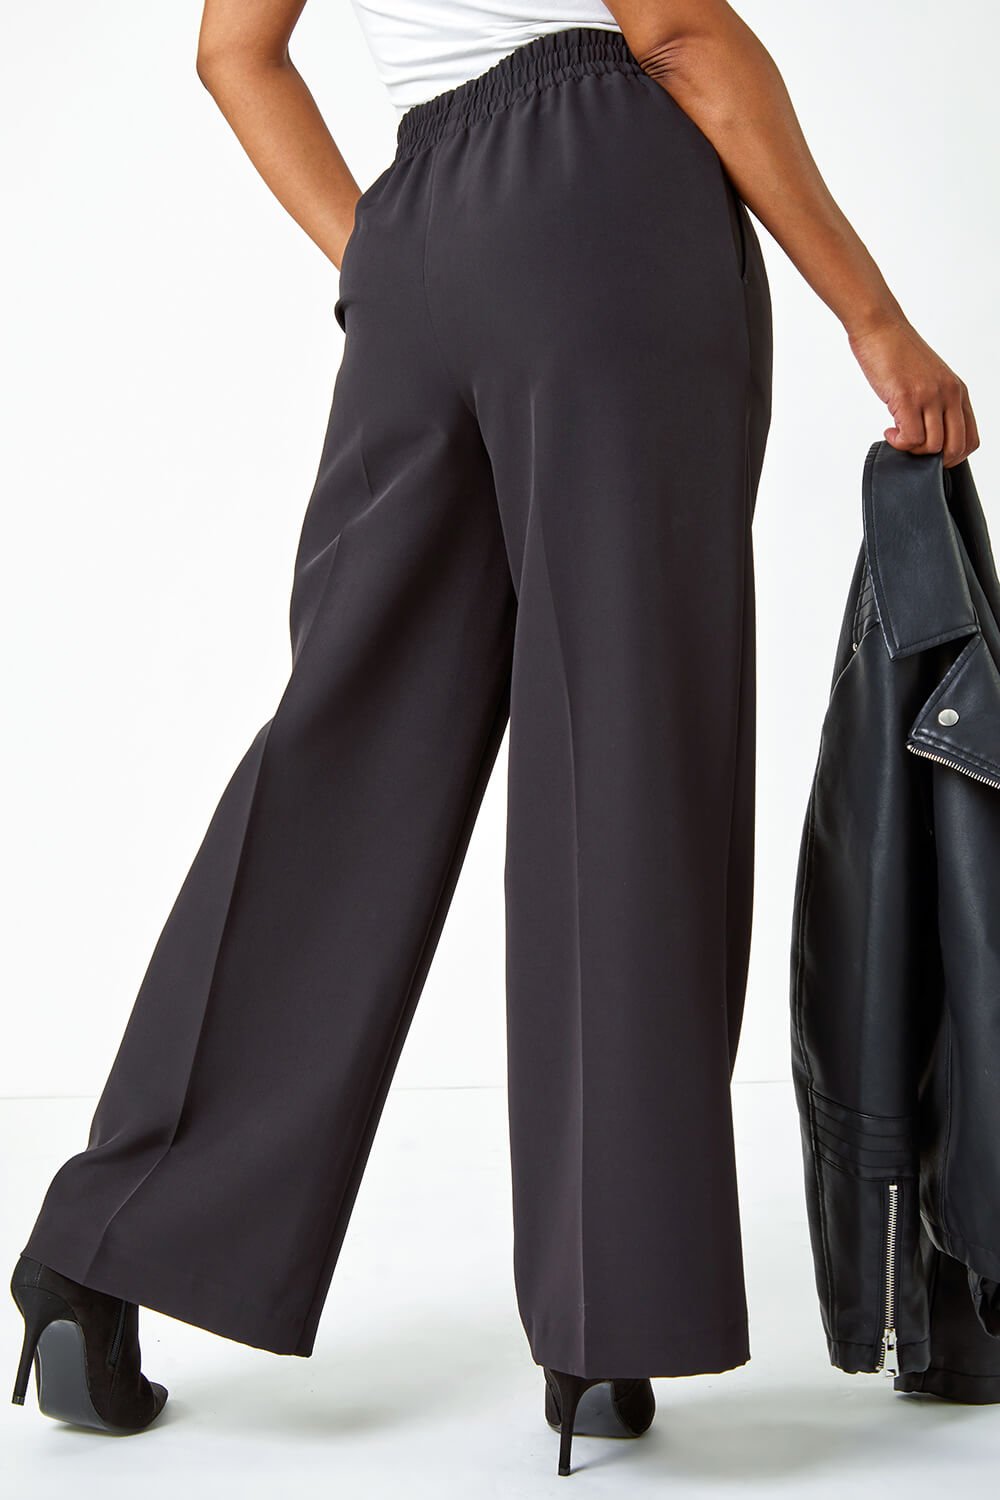 Black Petite Wide Leg Stretch Trousers, Image 3 of 5